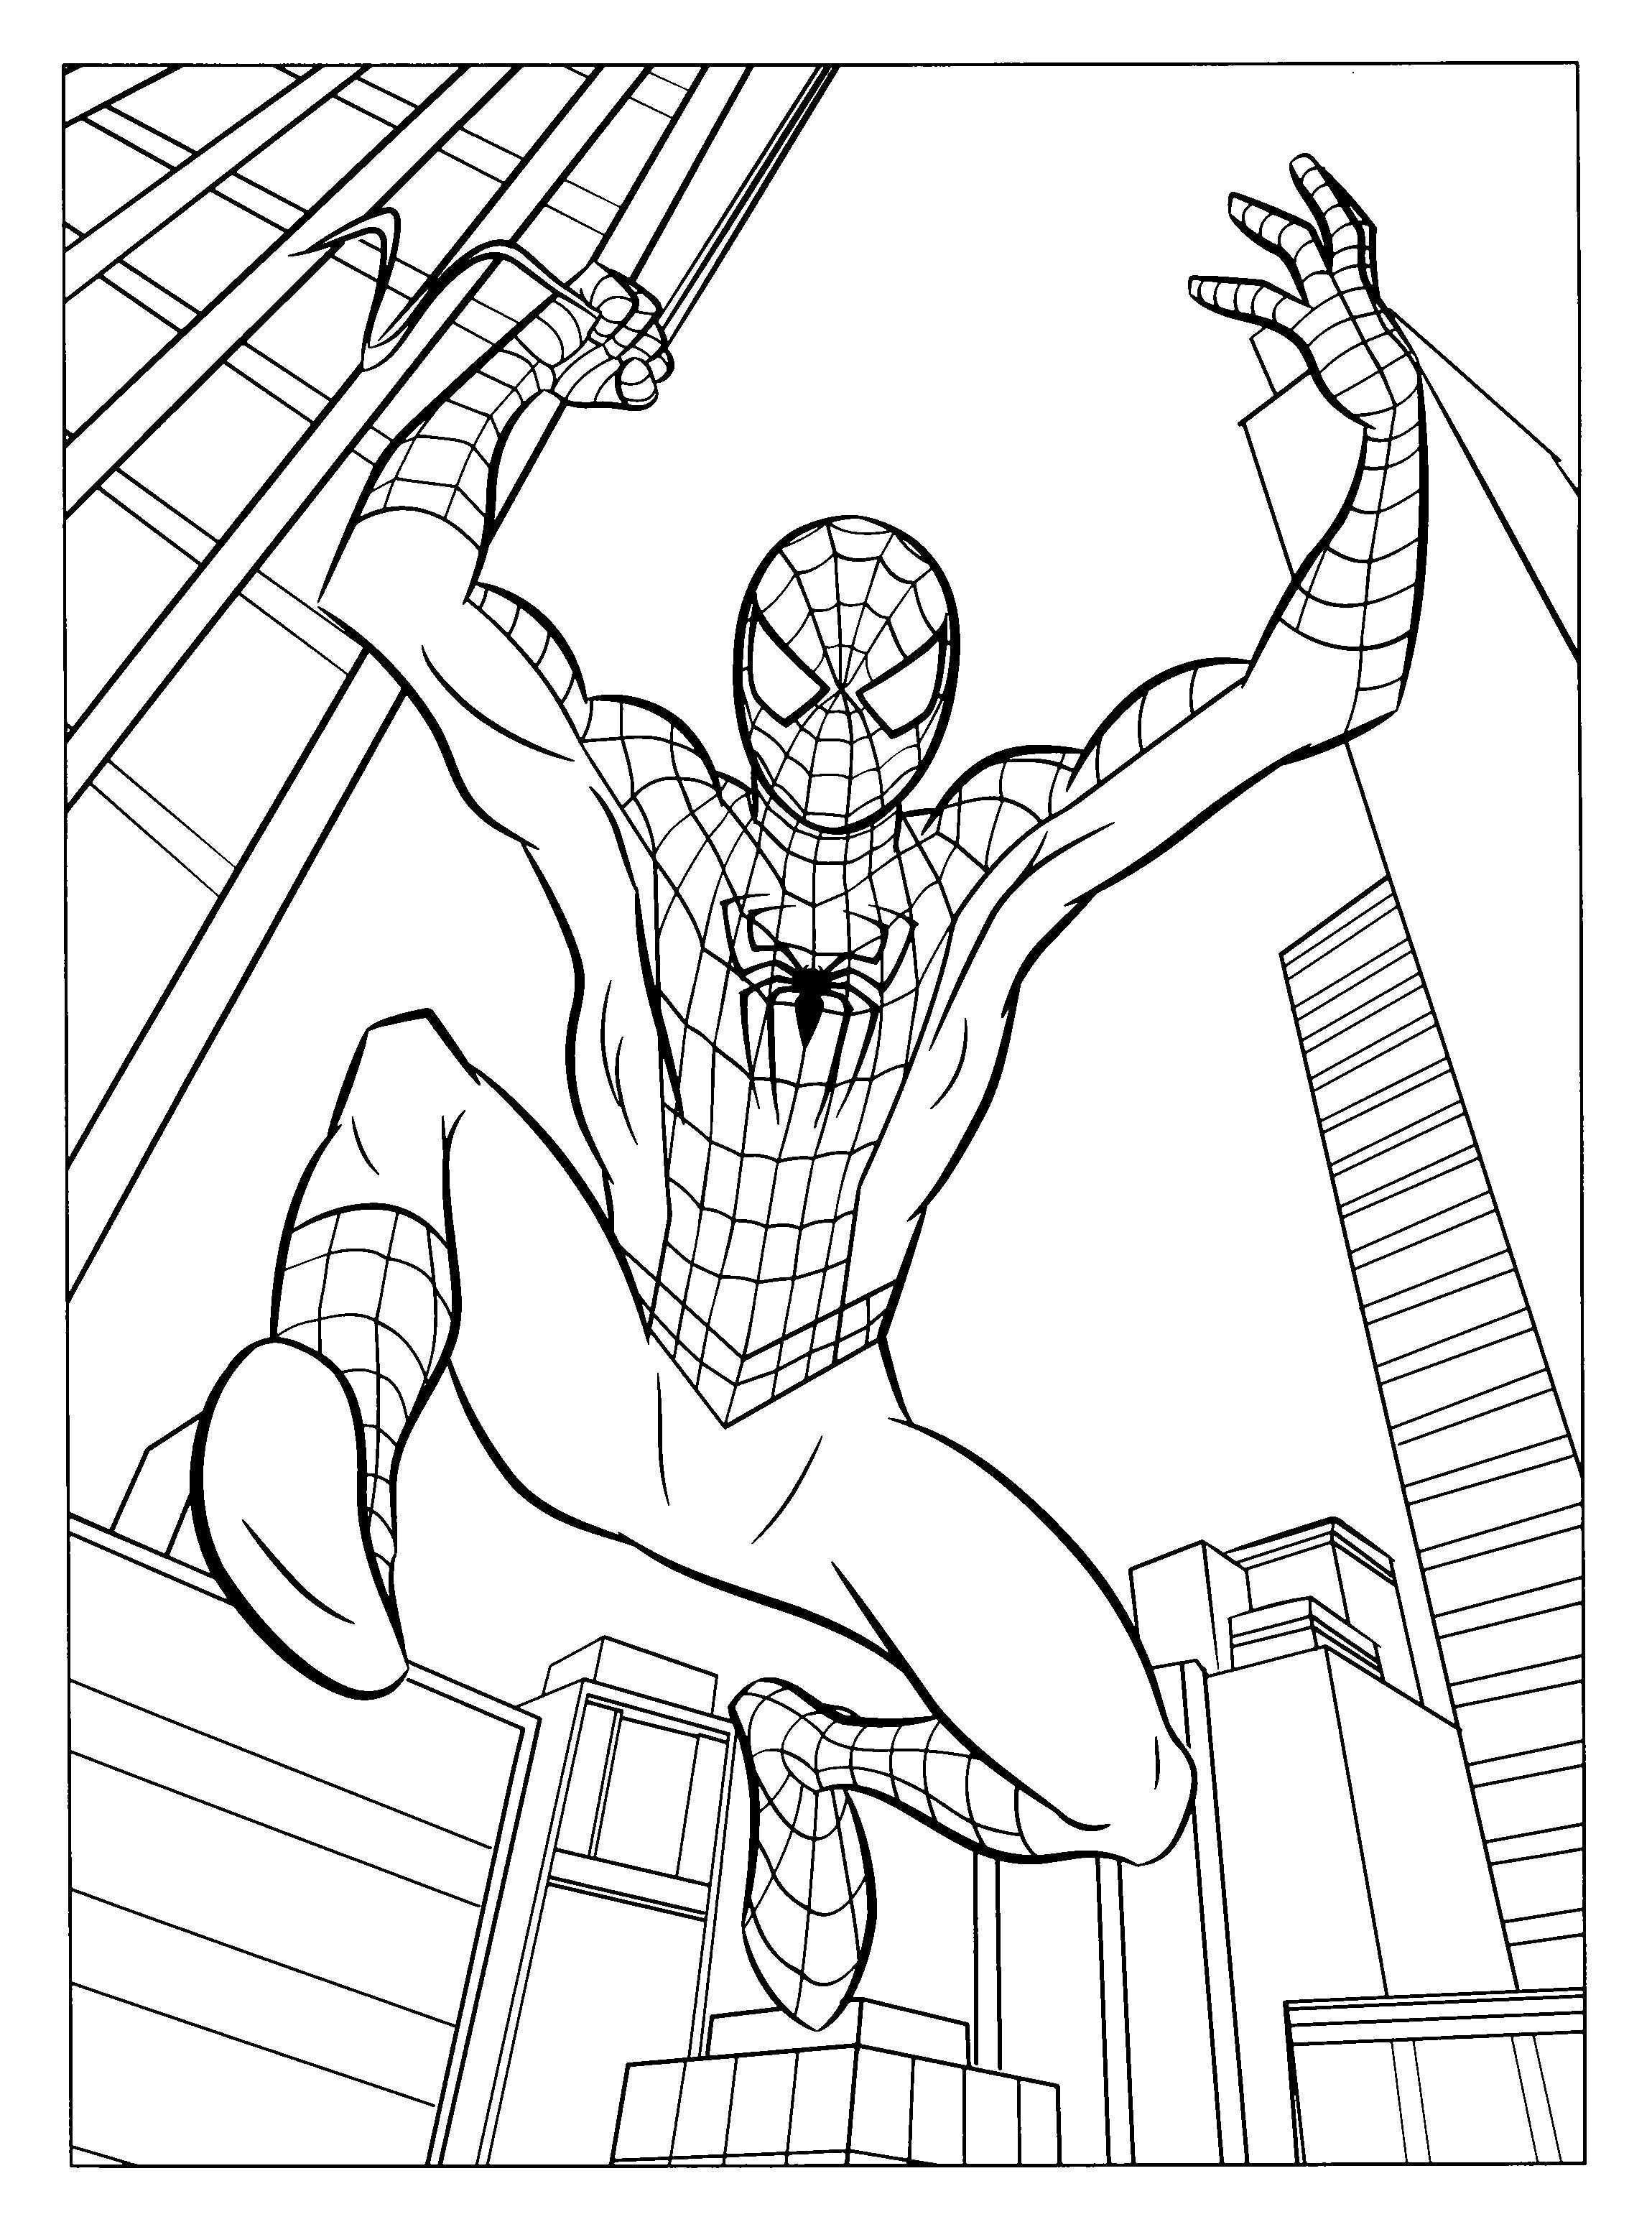 Free Printable Spiderman Coloring Pages For Kids Superhero Coloring Pages Superhero C